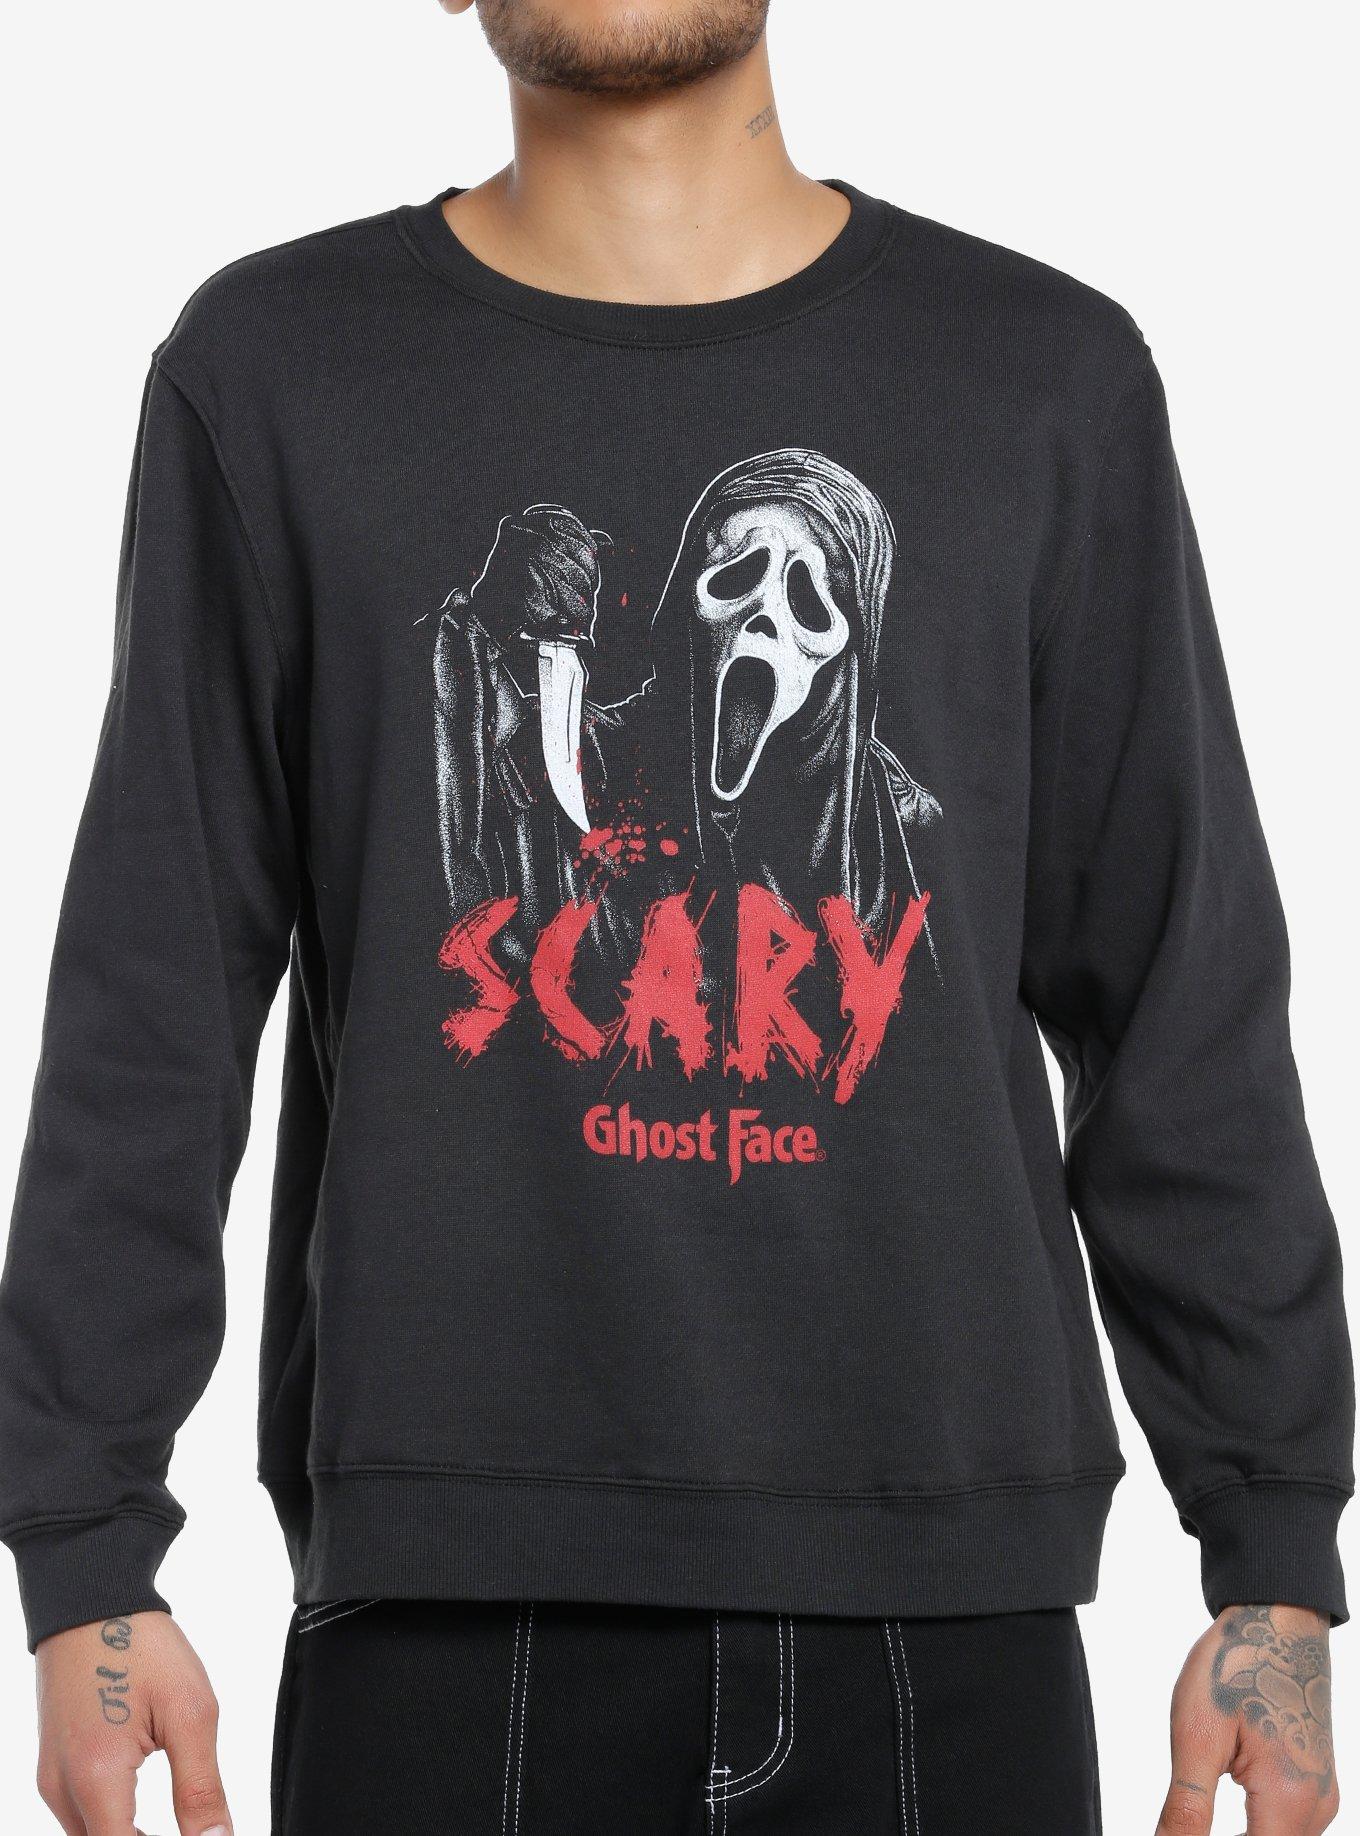 Scream Ghost Face Scary Sweatshirt | Hot Topic